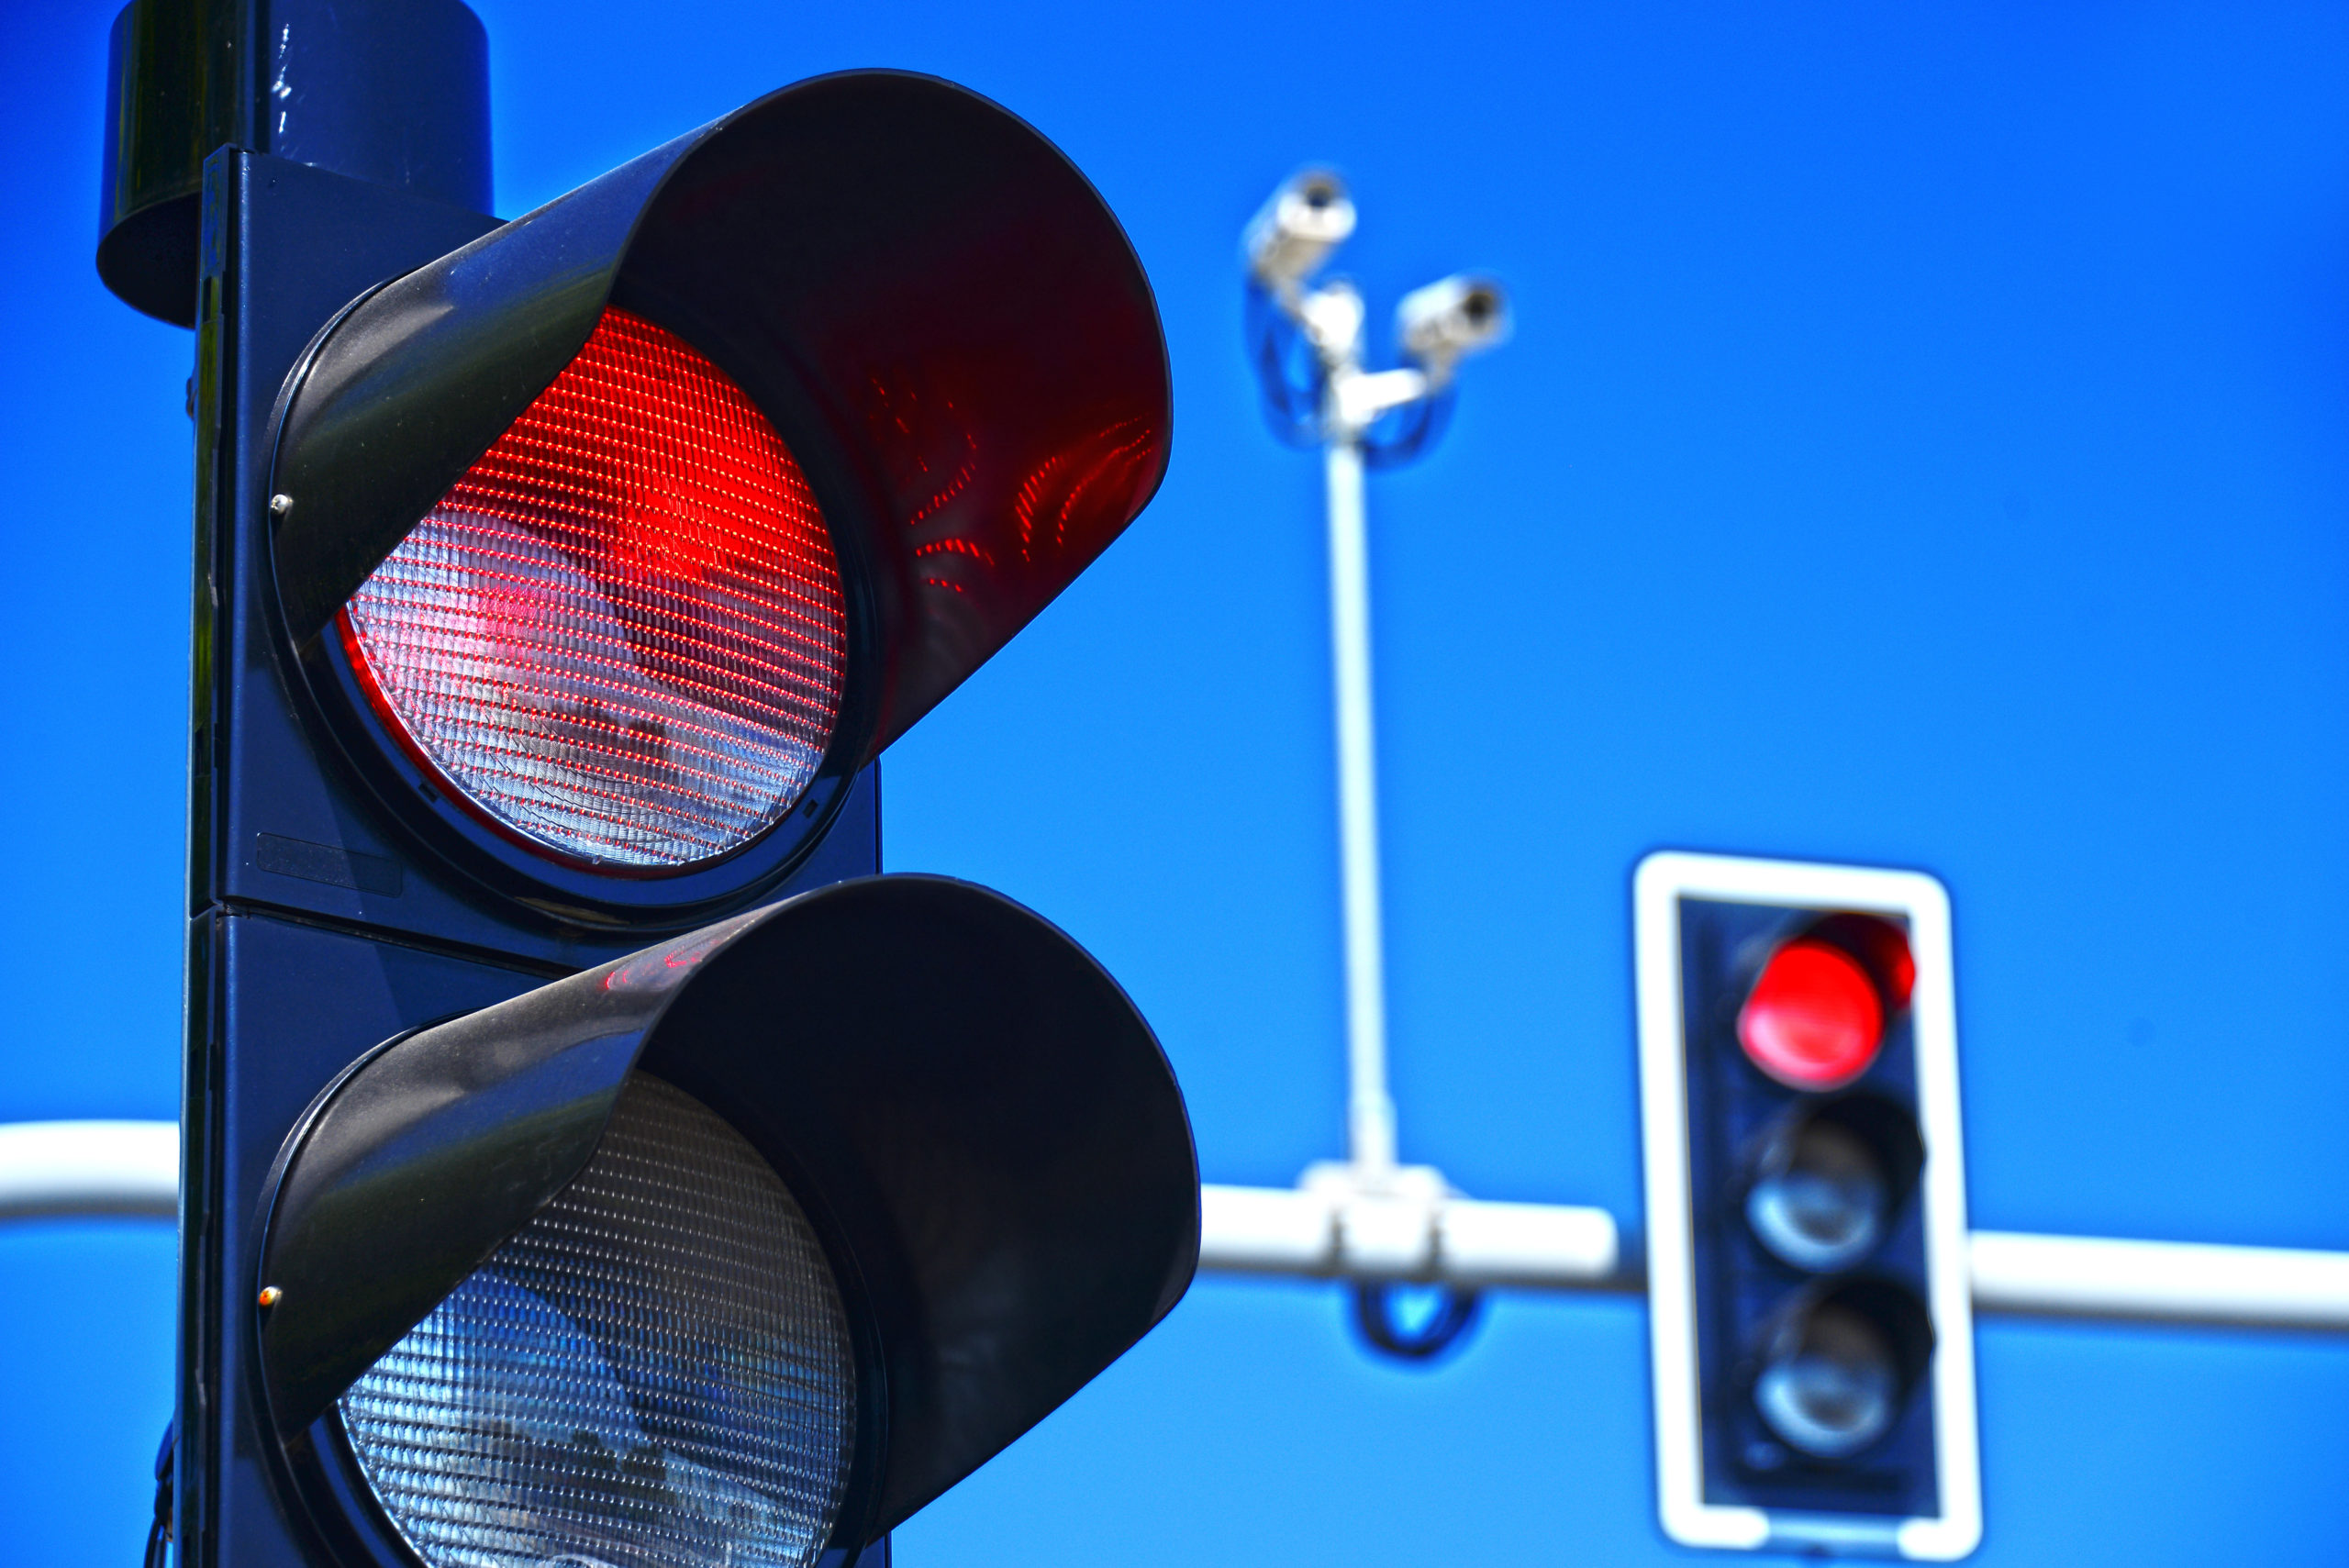 What Can Happen When a Driver Runs a Red Light?